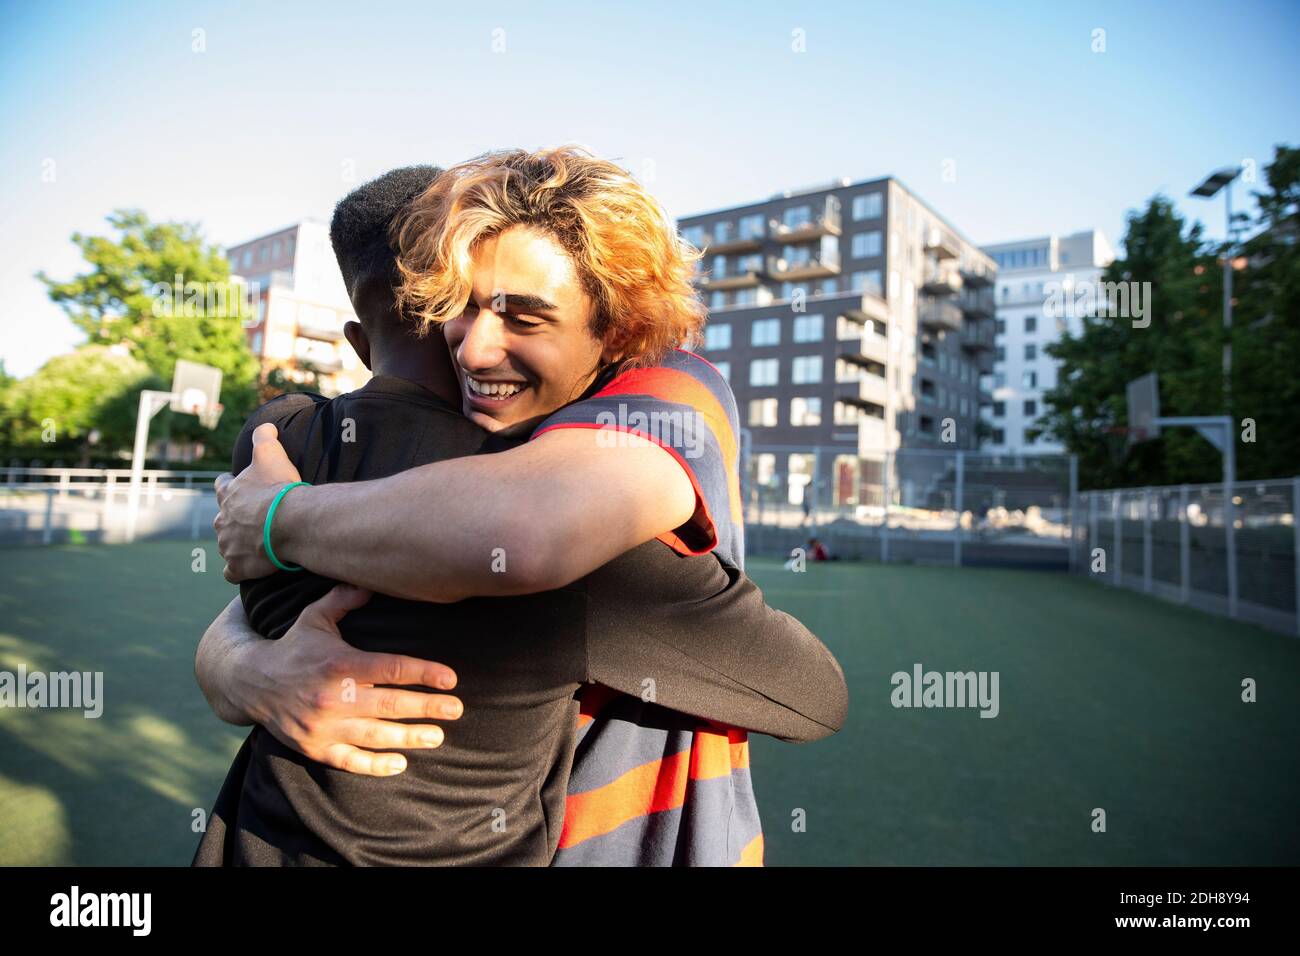 Happy friends embracing each other while playing in sports field Stock Photo